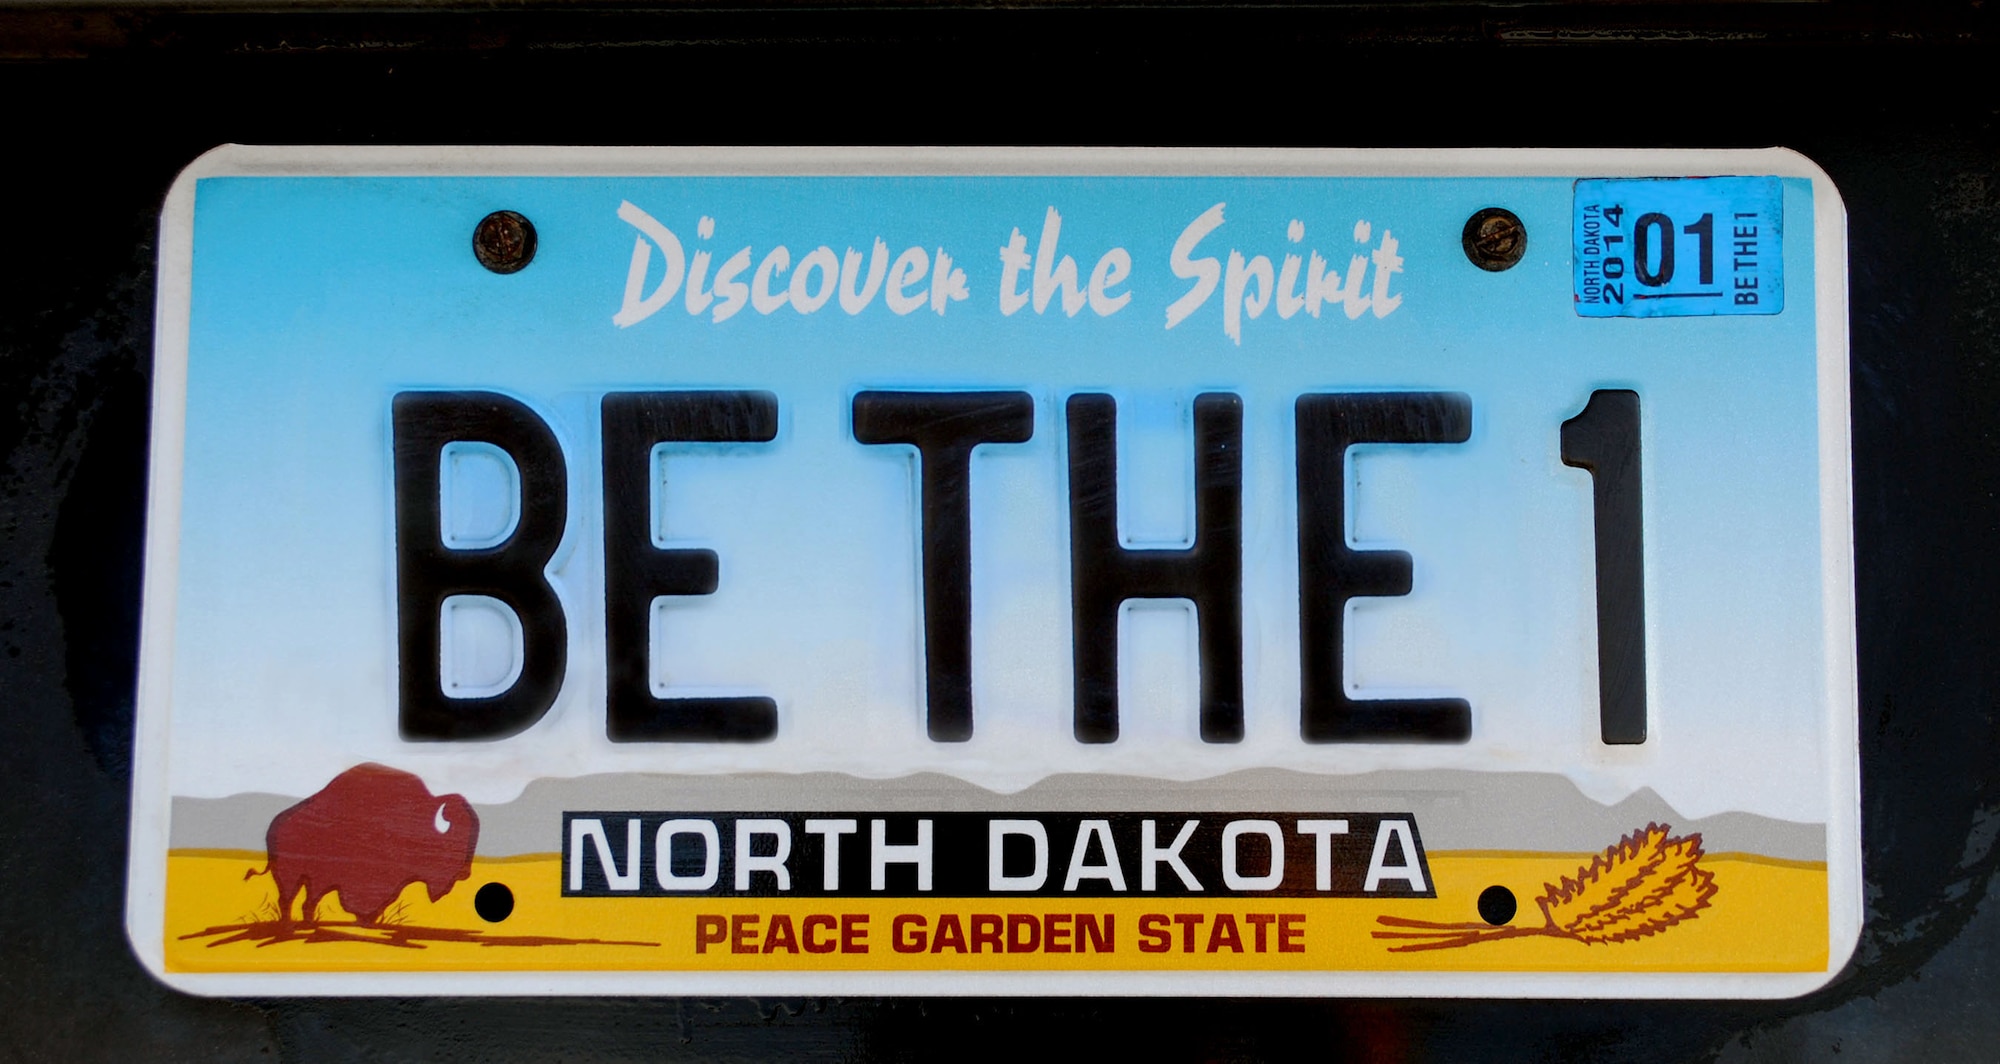 This psuedo North Dakota license plate was created as a complimentary image to 319th Mission Support Group commander, Col. Joe Lindsey's, commentary entitled Be the One. (U.S. Air Force graphic/Staff Sgt. Luis Loza Gutierrez) (This image was manipulated by adding text from multiple photos of other North Dakota license plates using the cloning tool feature on Adobe Photo Shop CS4)